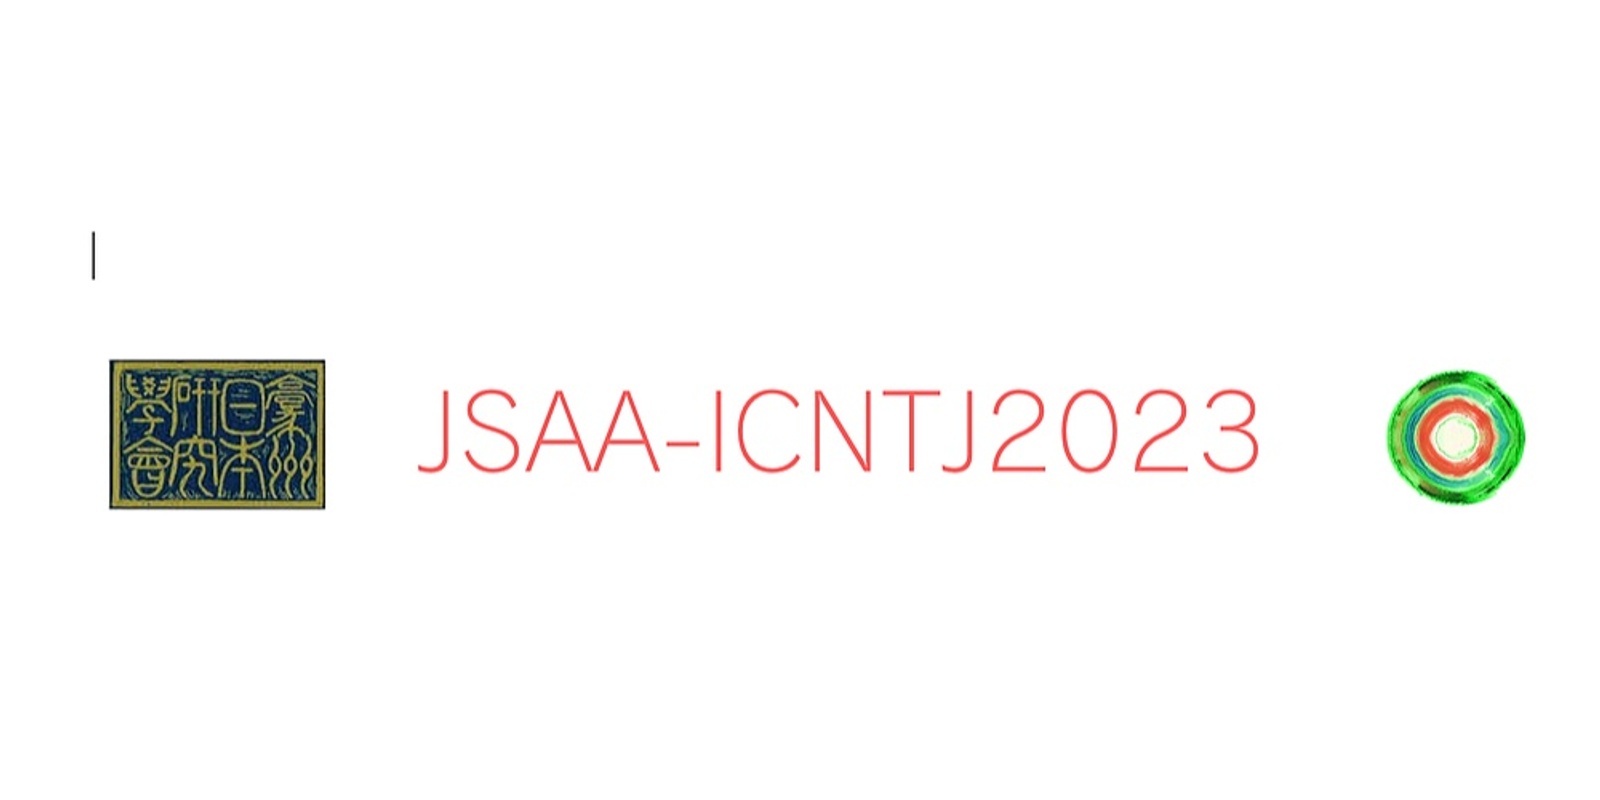 Welcome Reception for JSAA-ICNTJ2023 